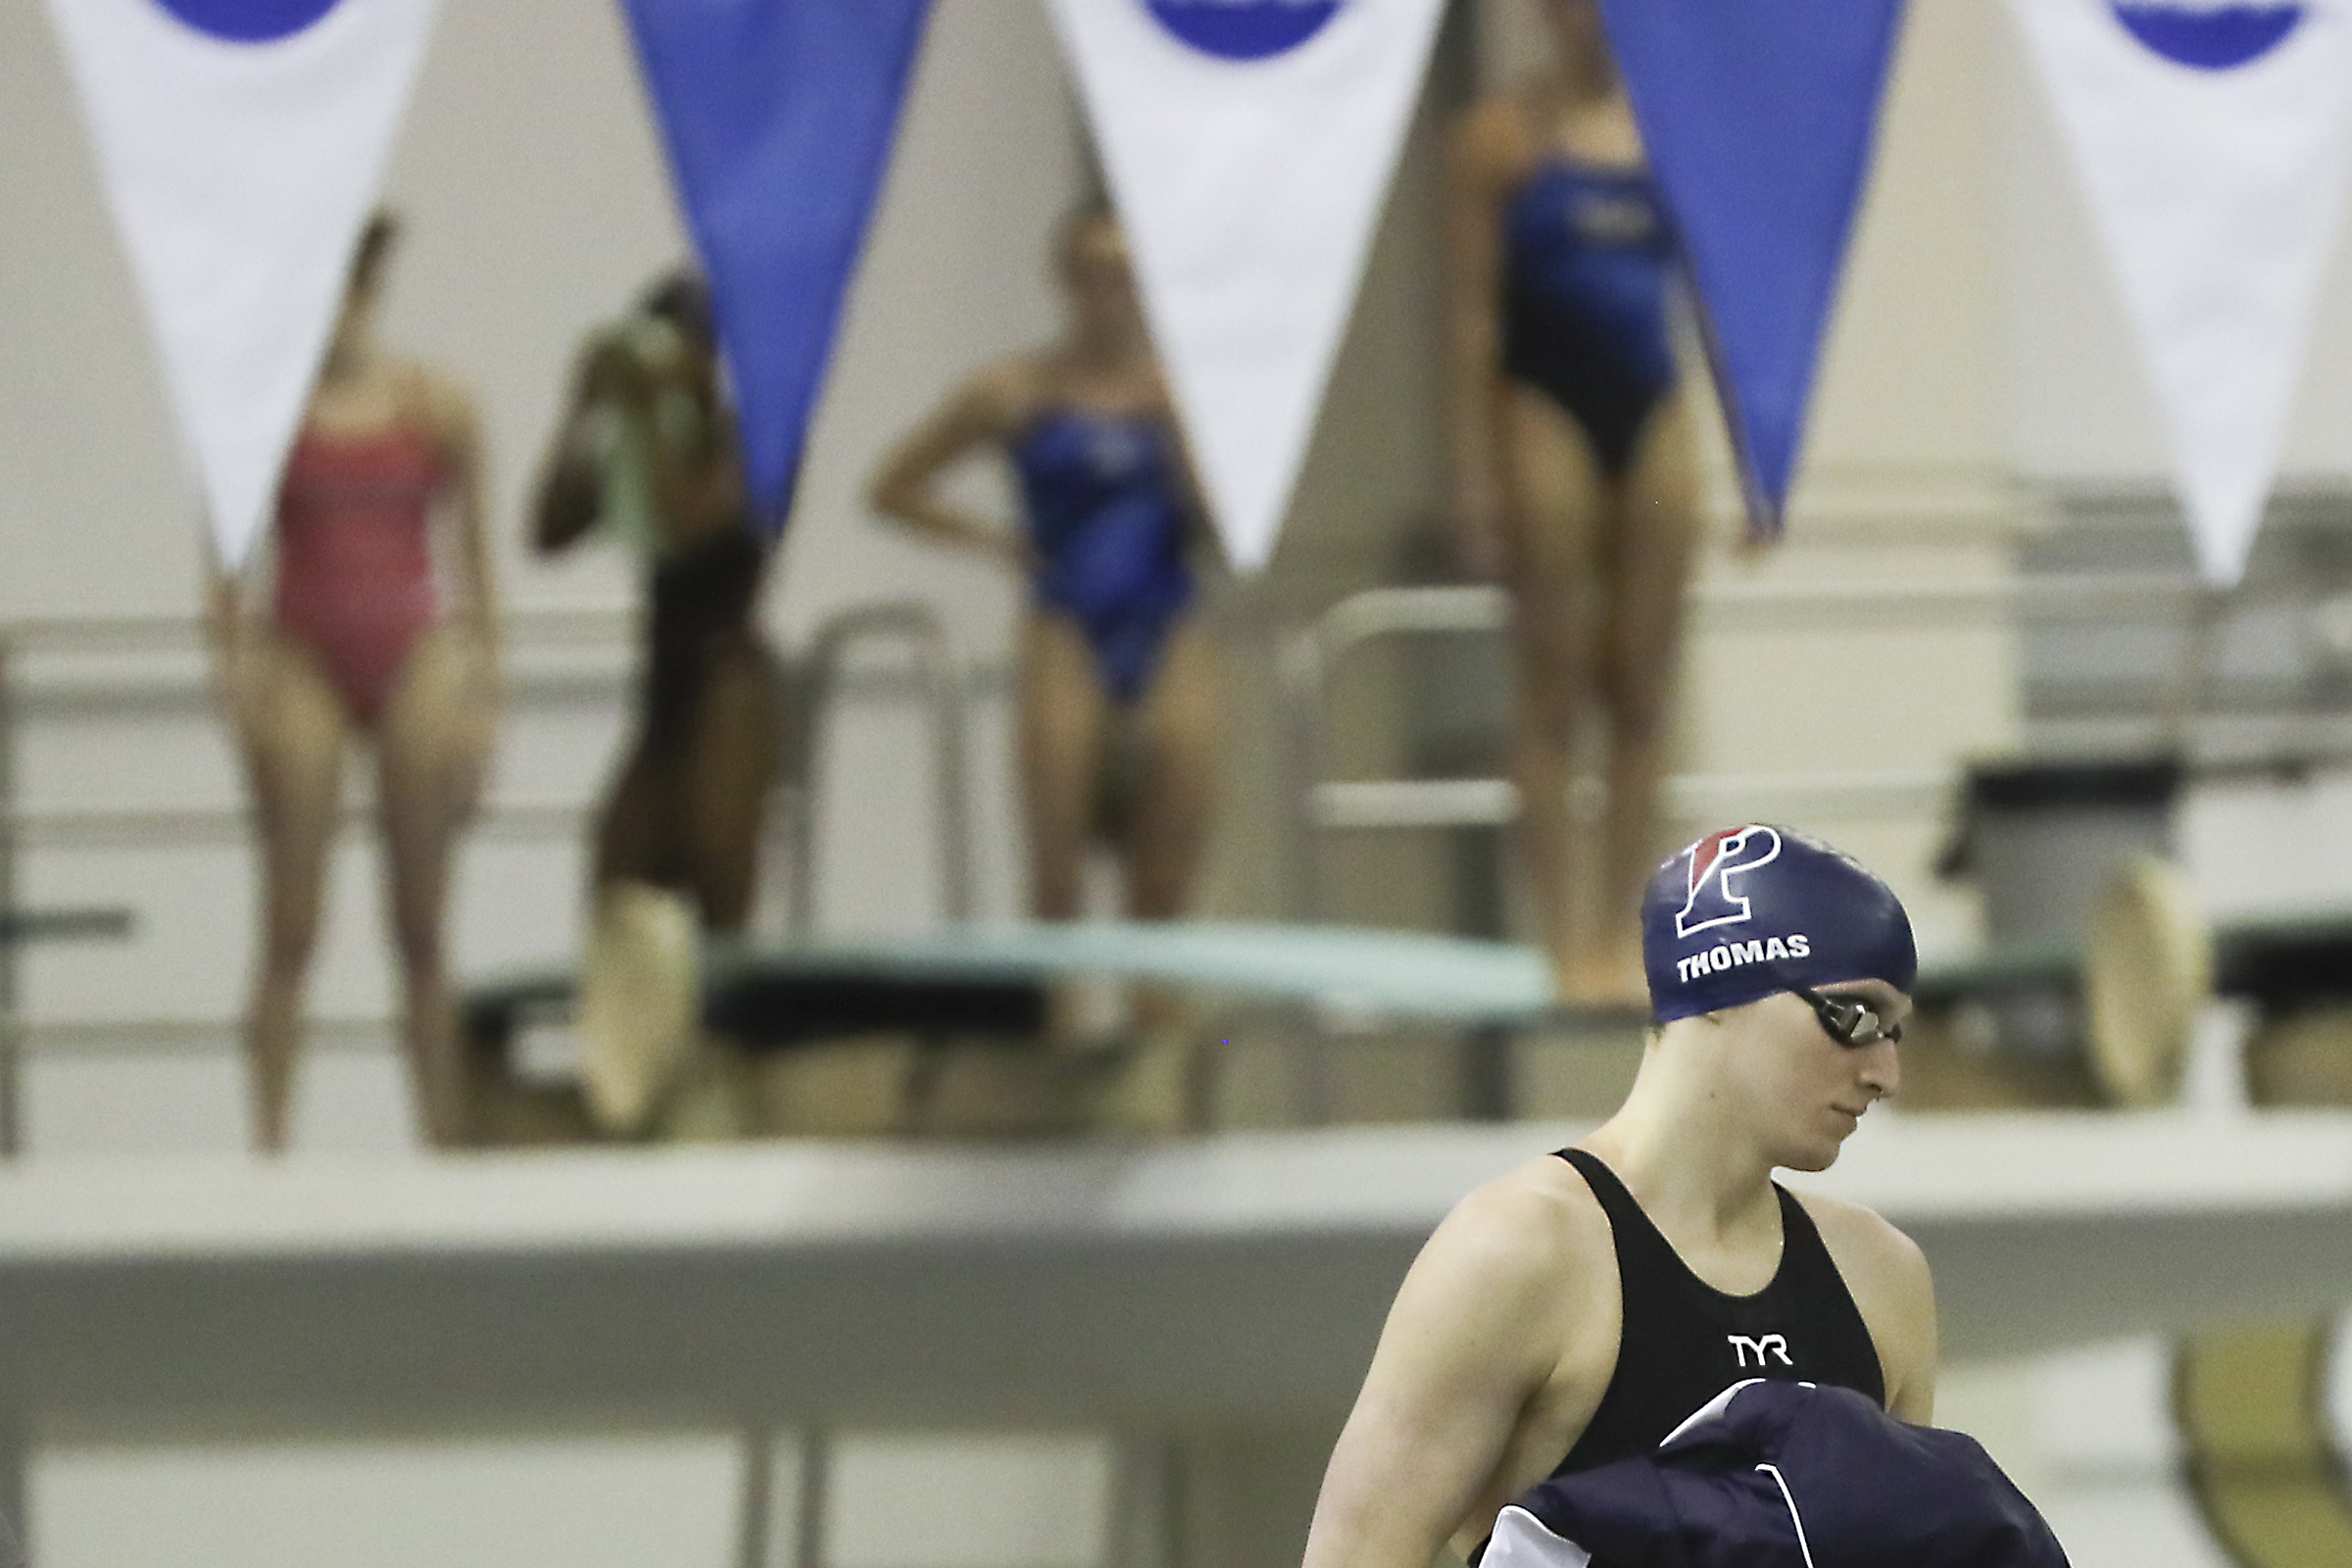 Penn swimmer Lia Thomas won one event at NCAA championships, but didnt break any records